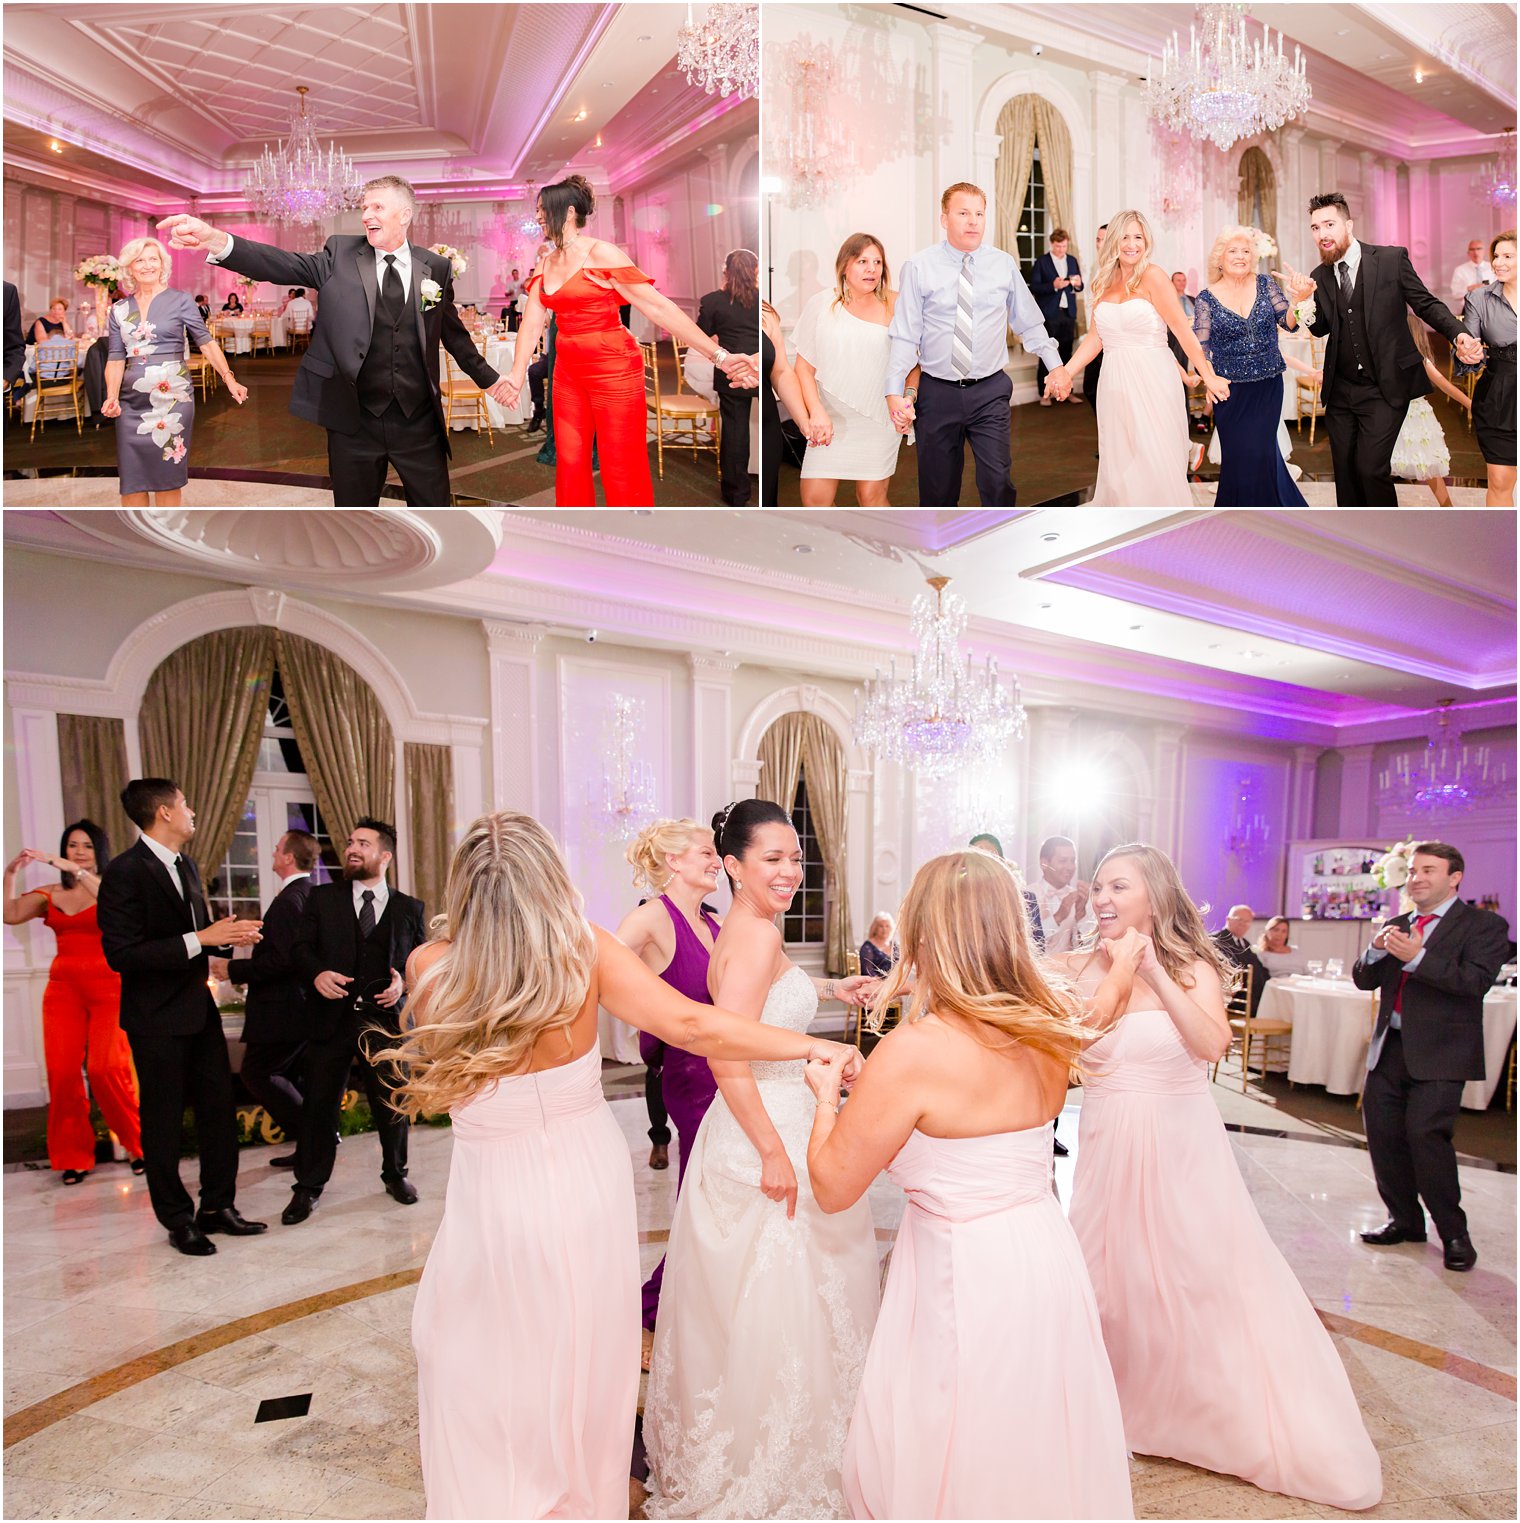 guests dancing at wedding reception at Rockleigh Country Club